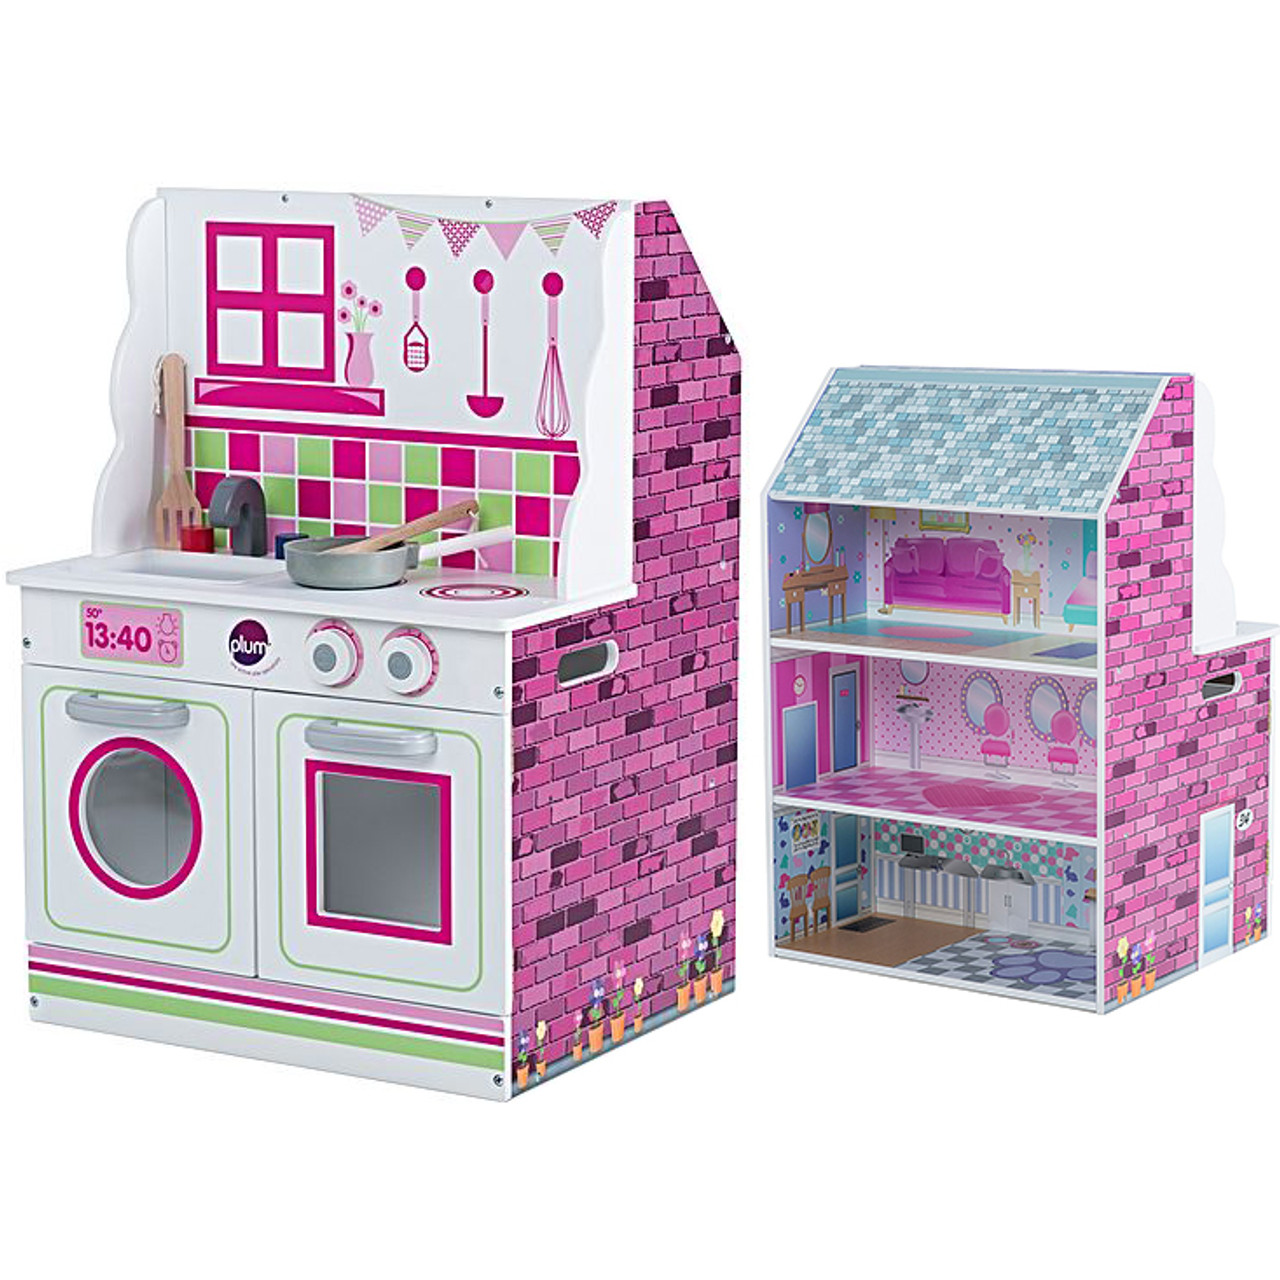 Plum 2-in-1 Kitchen and Dollhouse on 